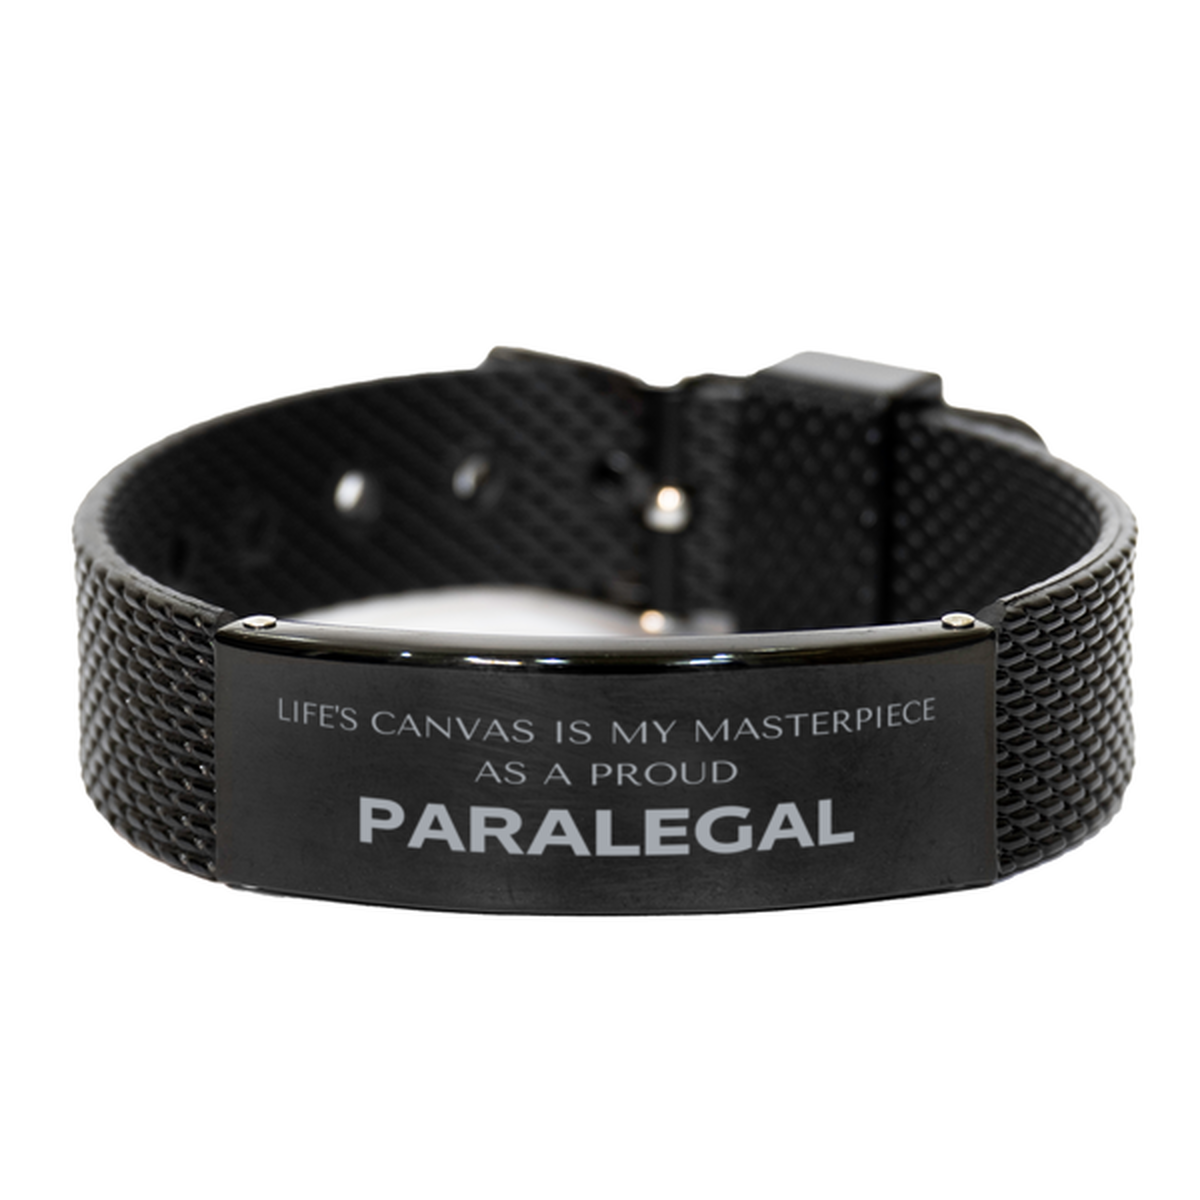 Proud Paralegal Gifts, Life's canvas is my masterpiece, Epic Birthday Christmas Unique Black Shark Mesh Bracelet For Paralegal, Coworkers, Men, Women, Friends